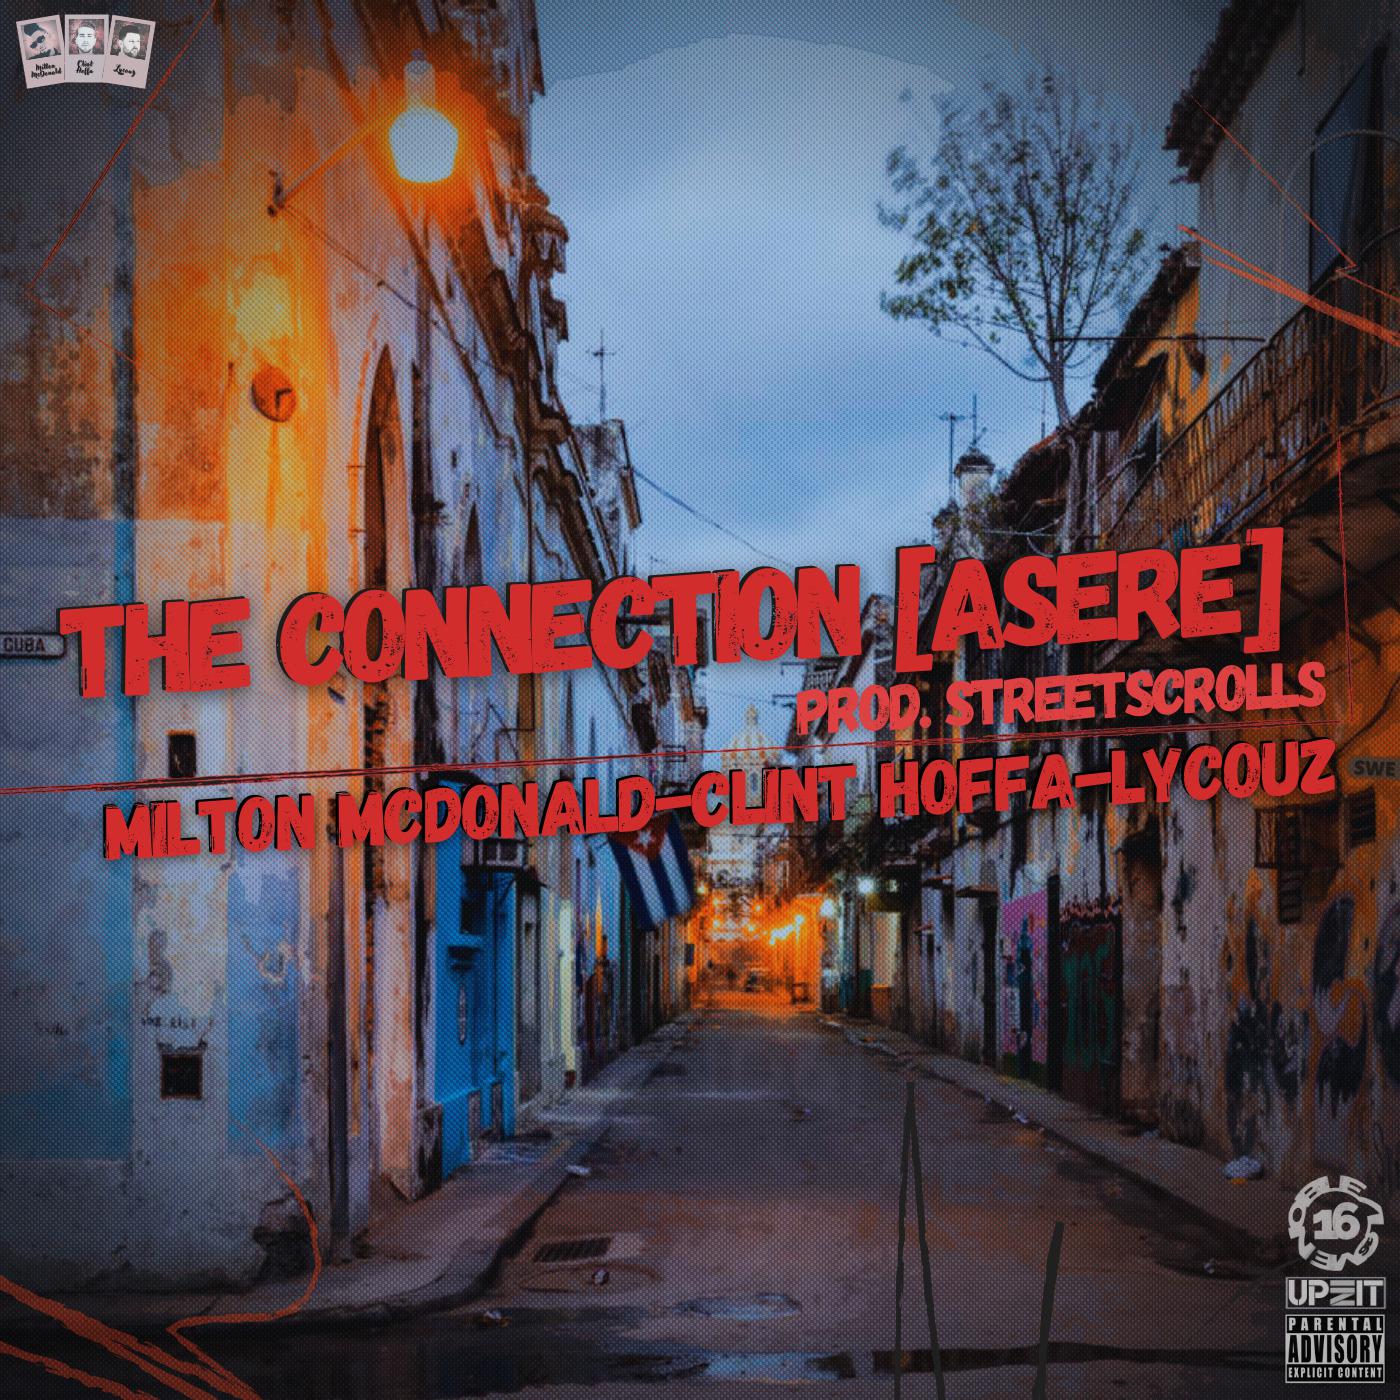 Milton McDonald - The Connection (Asere)